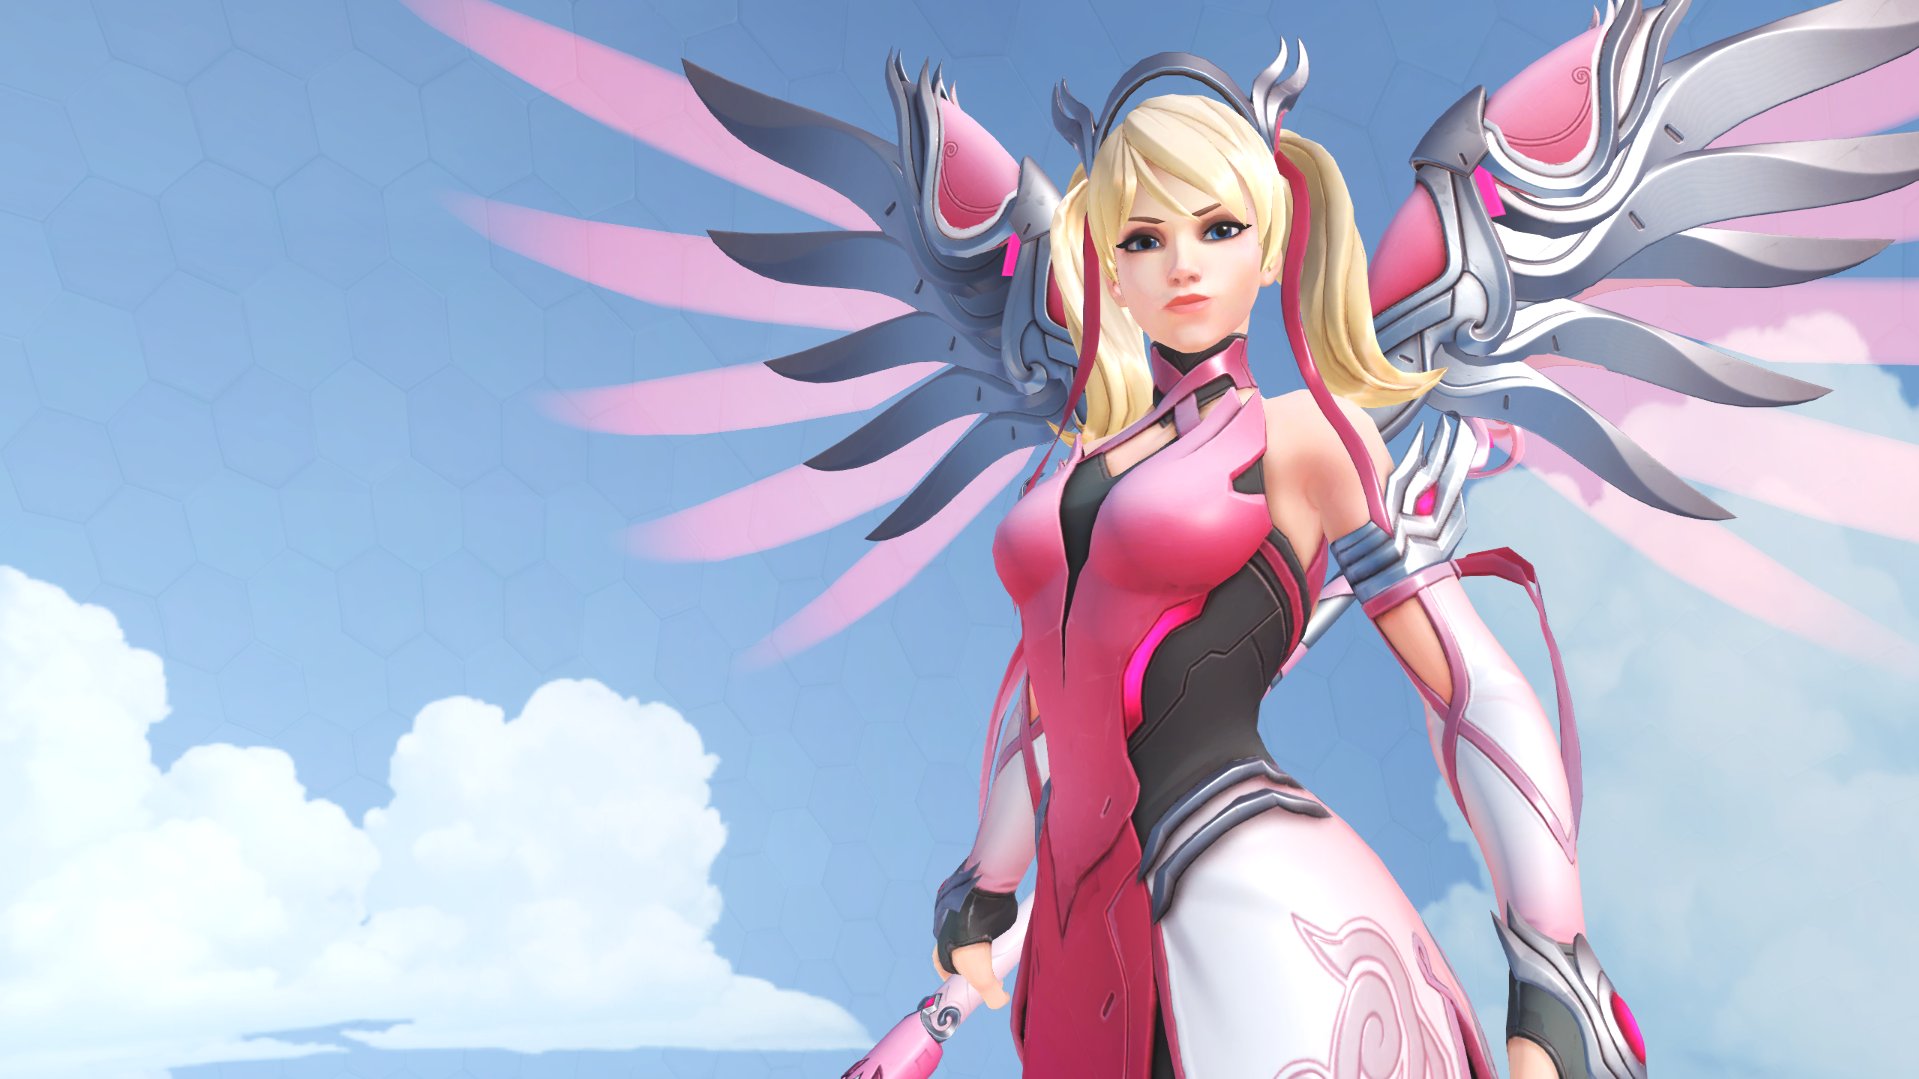 Overwatch's Pink Mercy skin costs $15, proceeds go to charity | PC Gamer